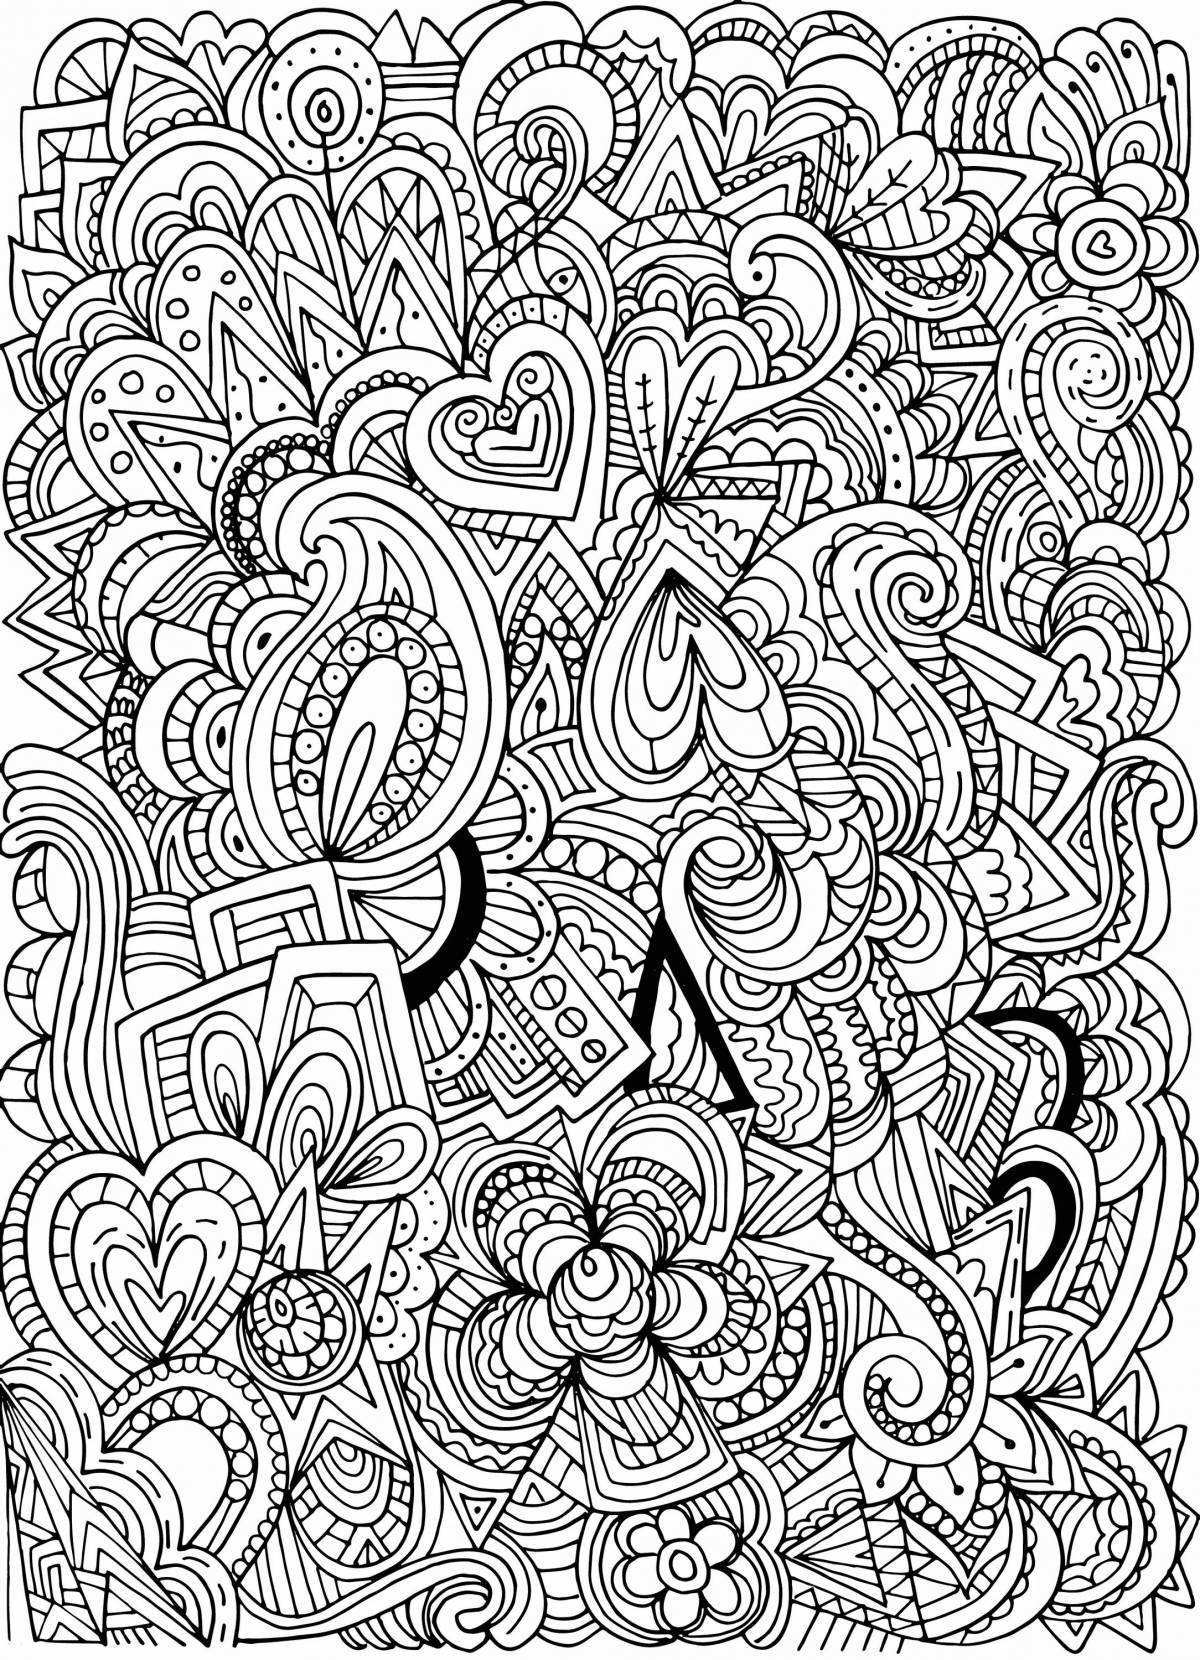 Stimulating anti-stress coloring for markers